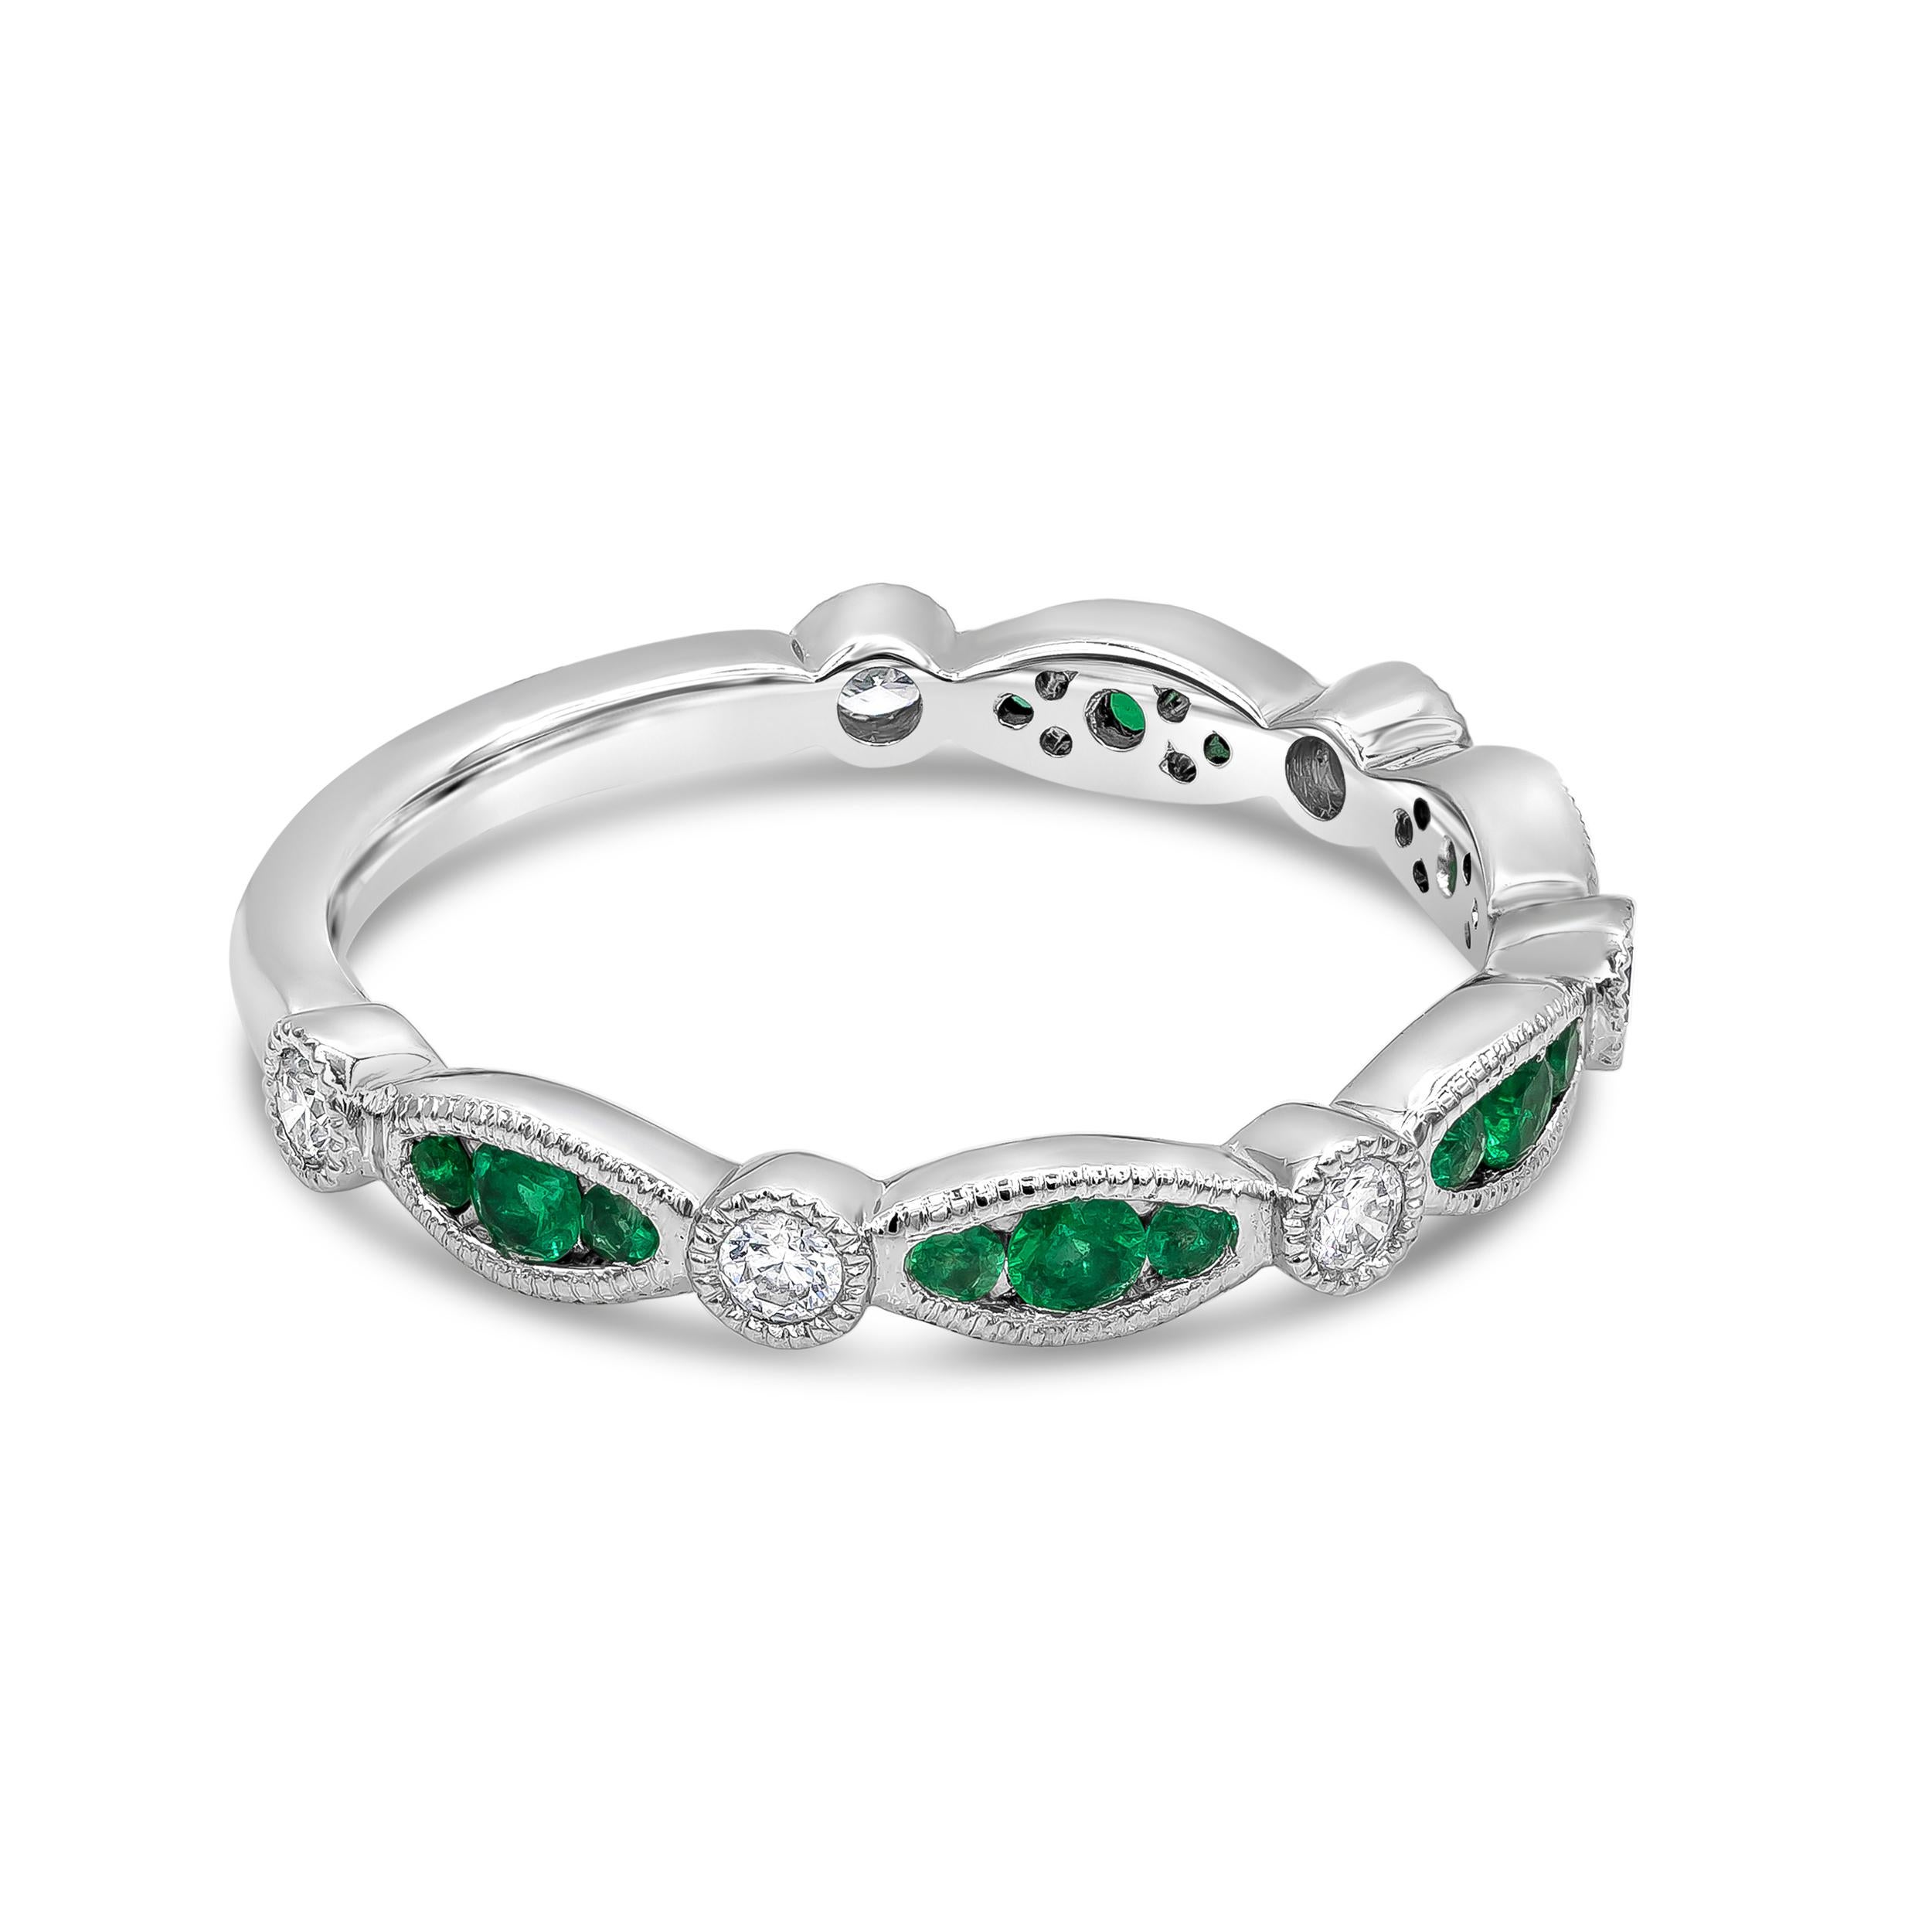 An vintage-inspired ring showcasing green emeralds weighing 0.21 carats total, set in a marquise bezel; alternated by 0.16 carats of round brilliant diamonds set in a bezel as well. Diamonds approximately F color, VS clarity. Bezel is finished with